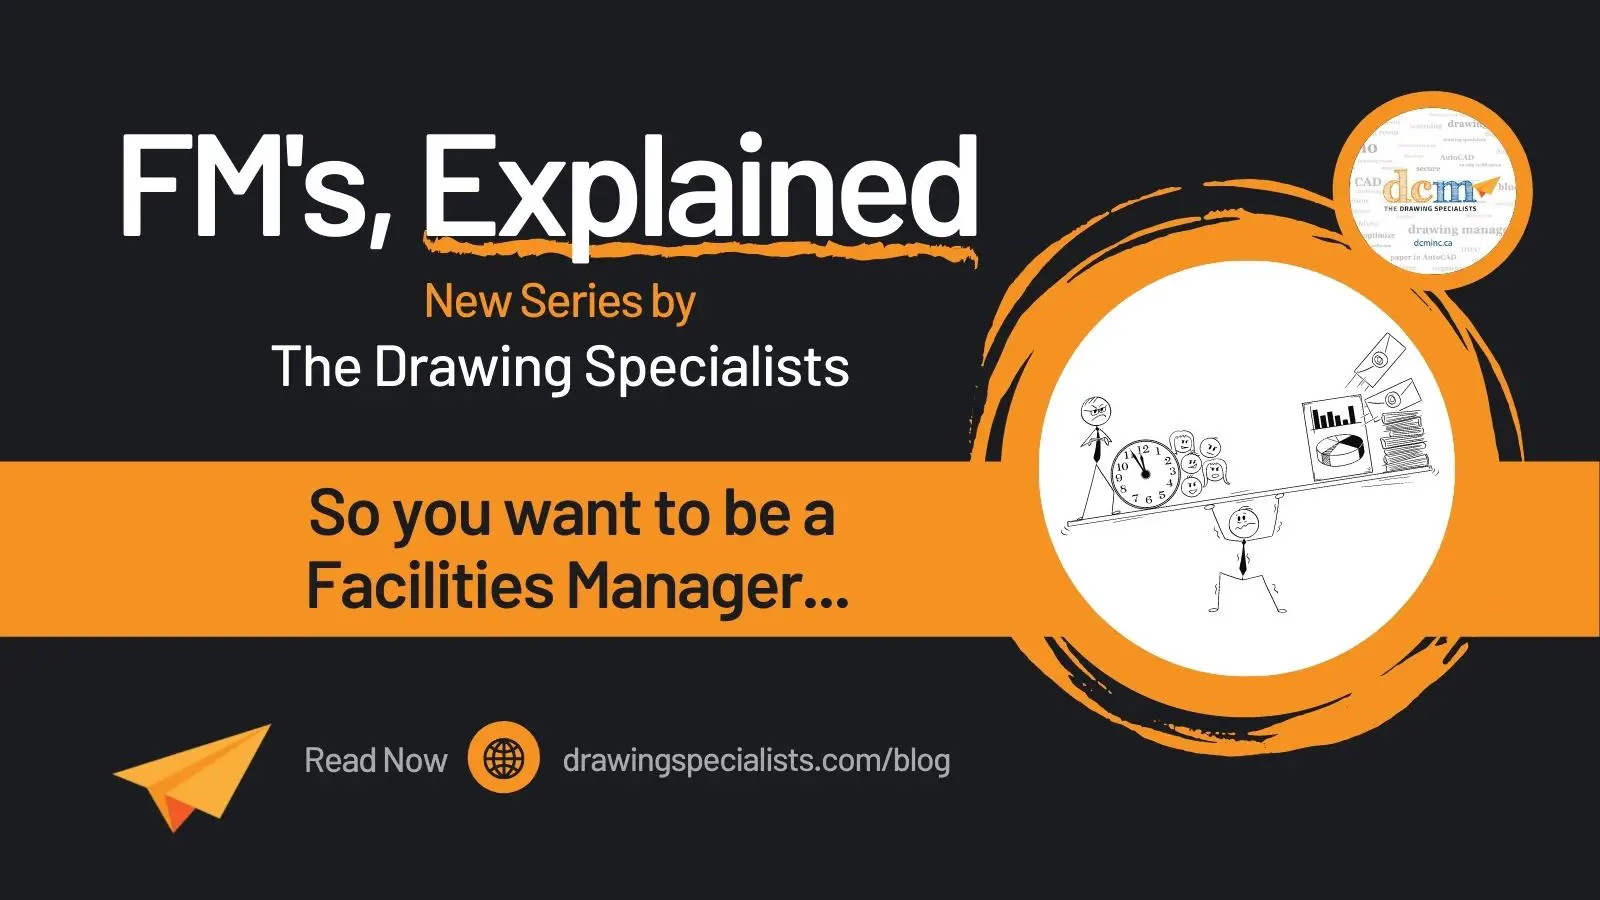 So you want to be a Facilities Manager – Career Advice from FM’s